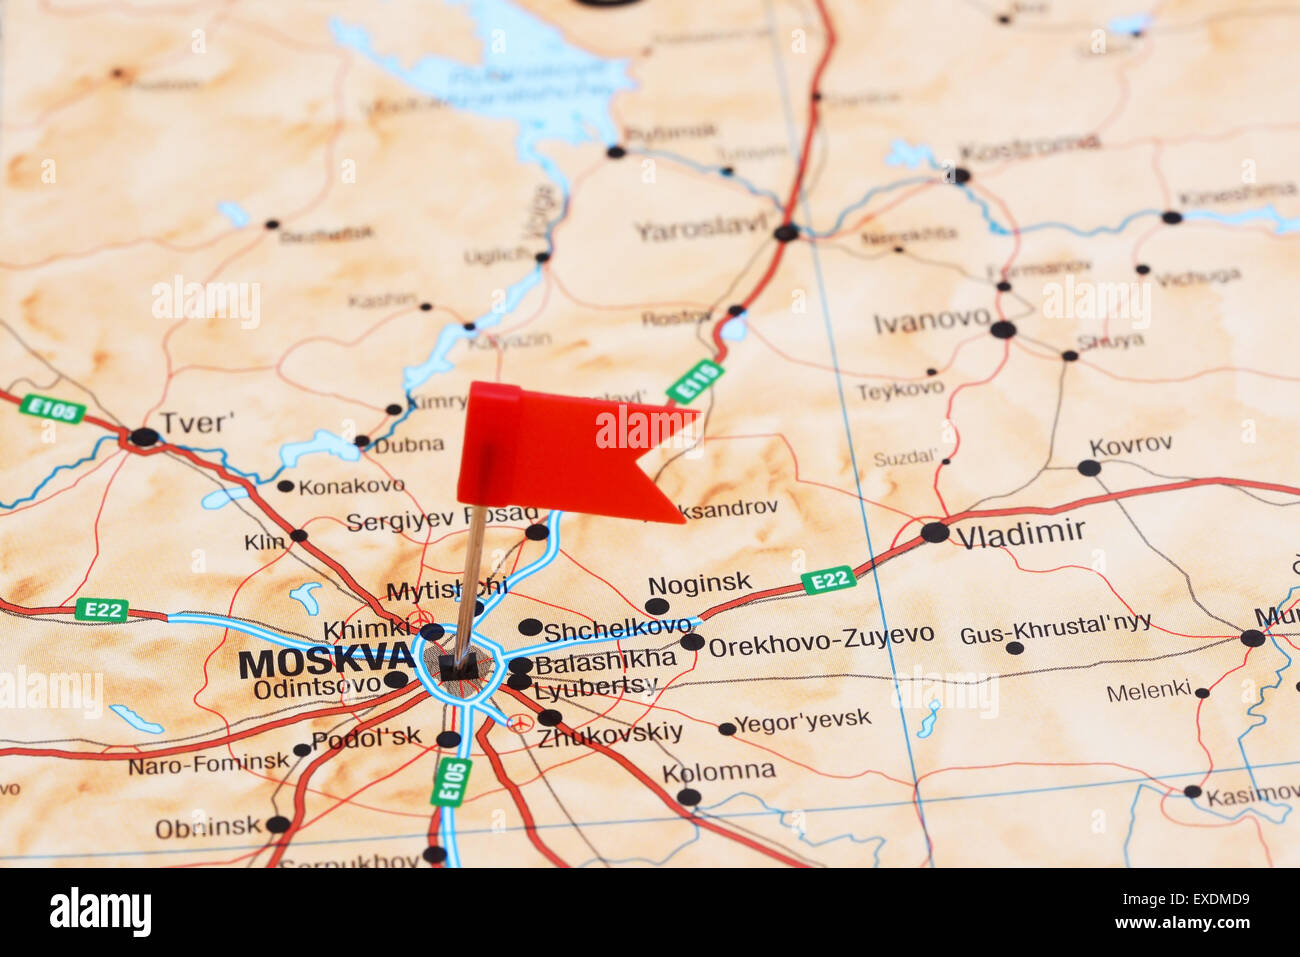 Moscow pinned on a map of europe Stock Photo